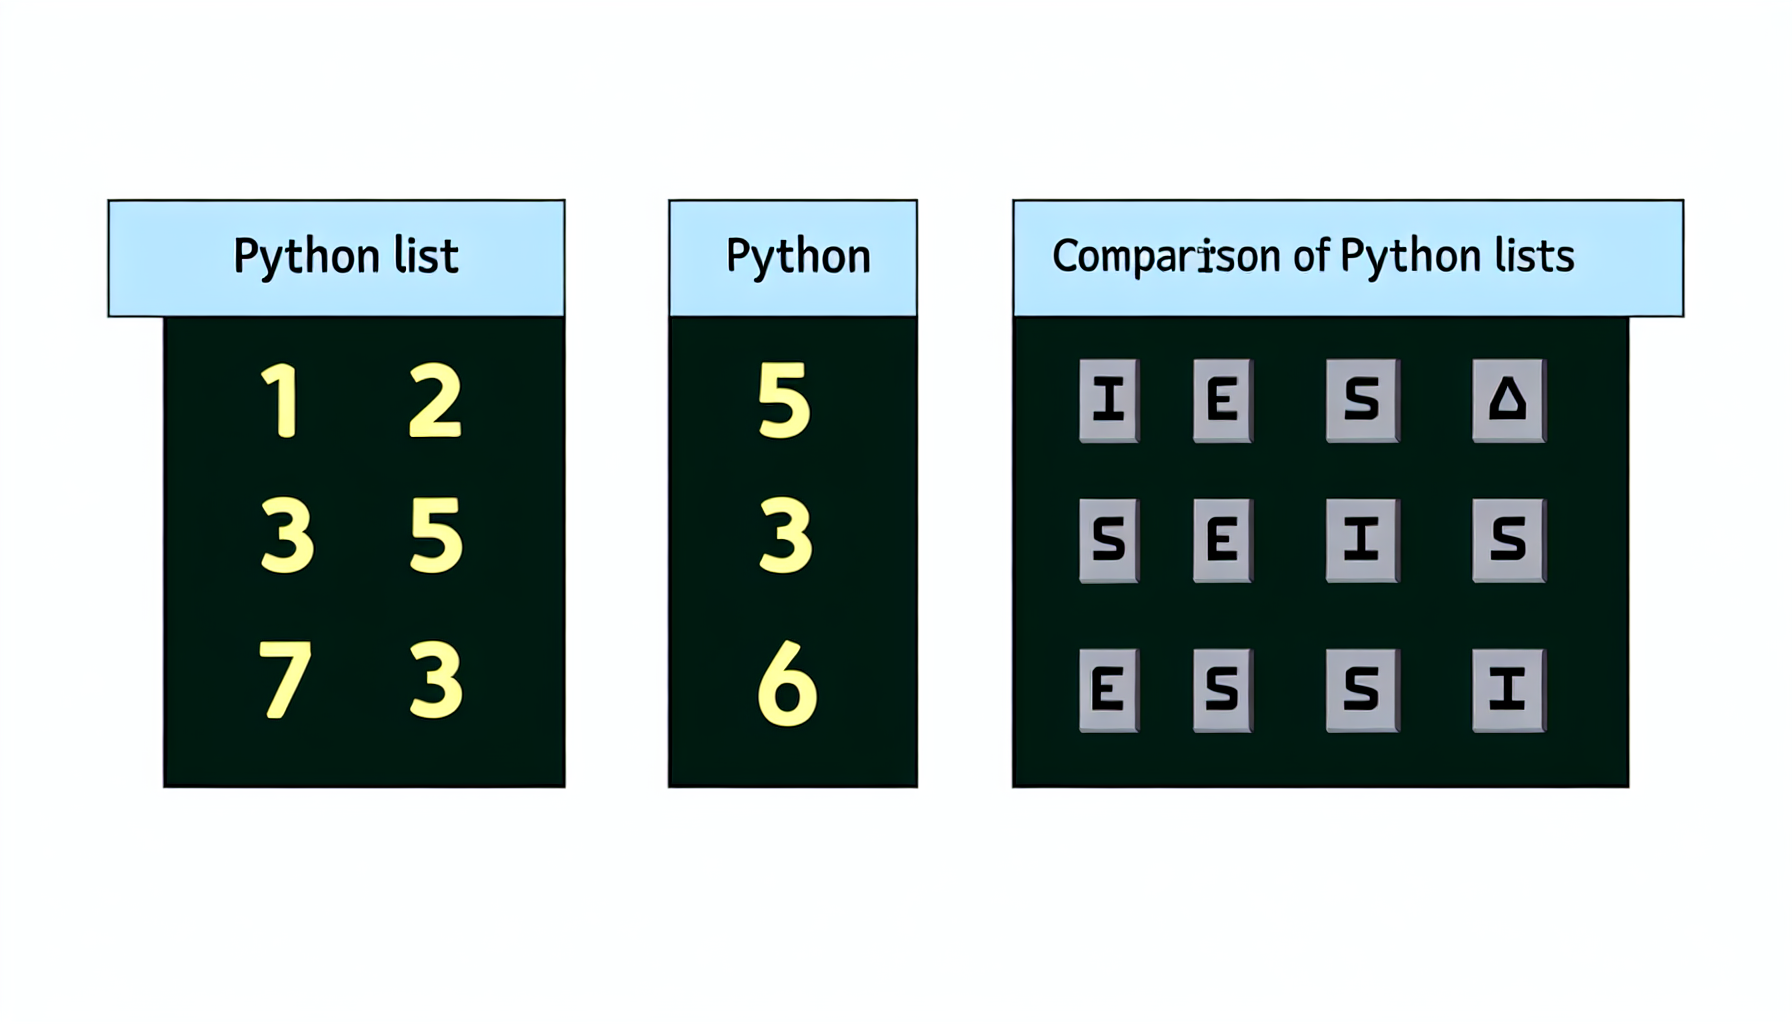 Side-by-side comparison of two Python lists